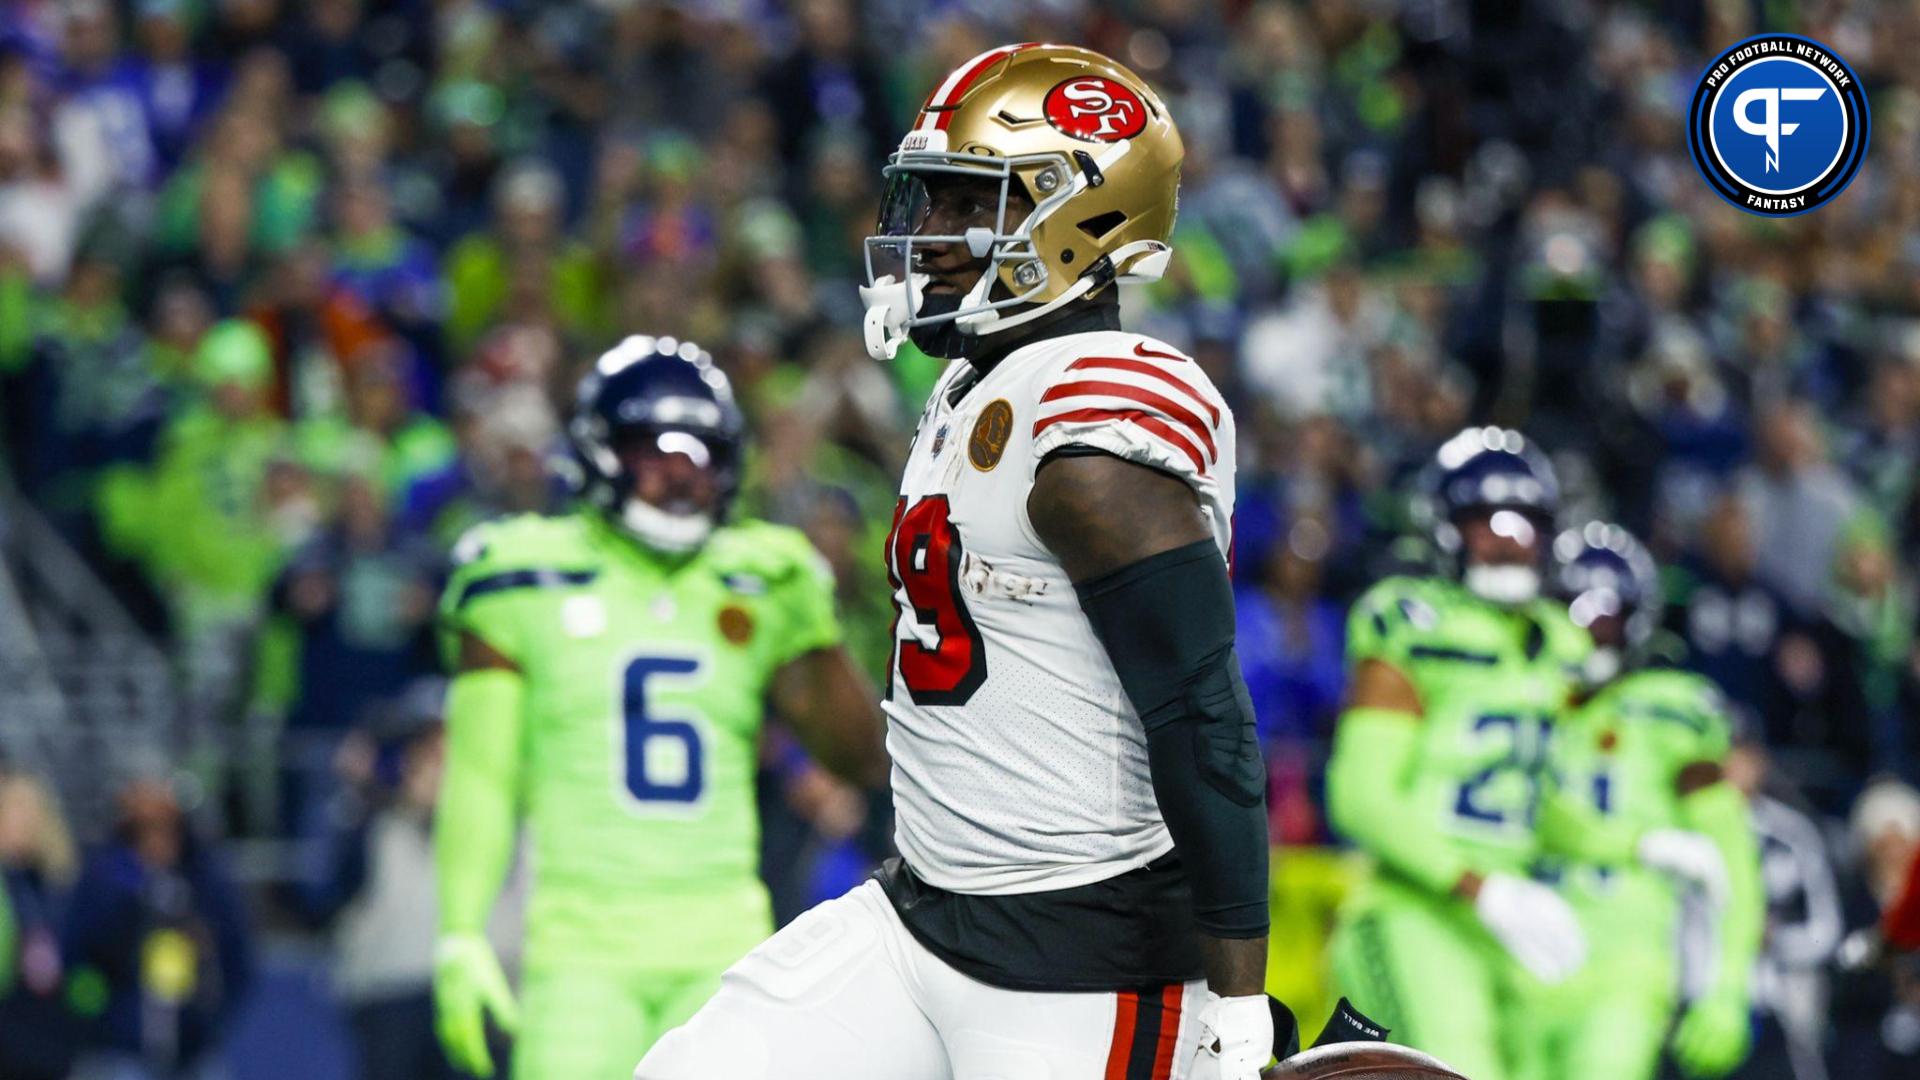 San Francisco 49ers wide receiver Deebo Samuel (19) celebrates after rushing for a touchdown against the Seattle Seahawks during the first quarter at Lumen Field.